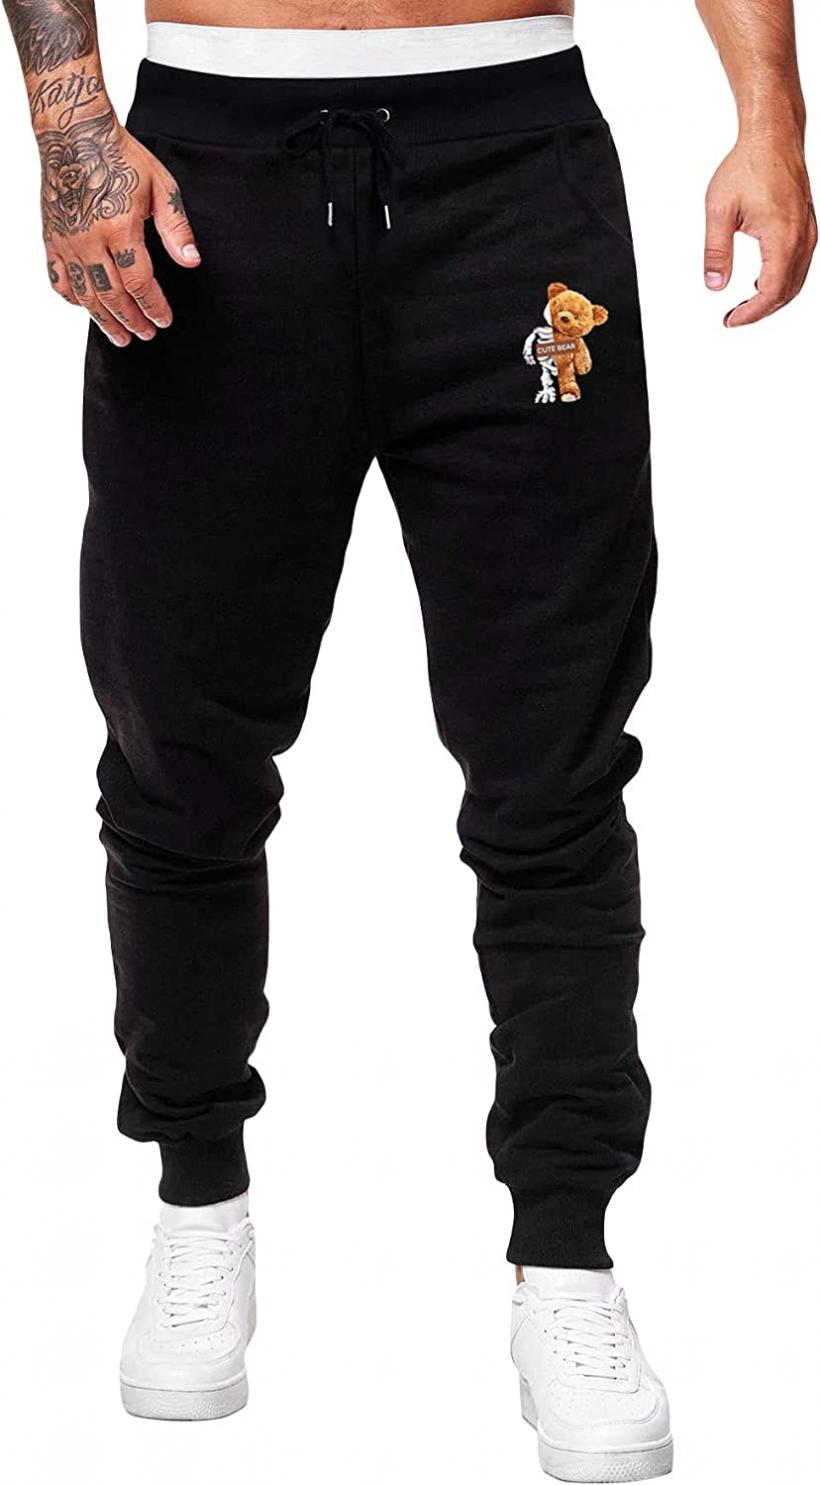 SOLY HUX Men's Graphic Print Drawstring High Waisted Sweatpants Joggers Pants with Pocket